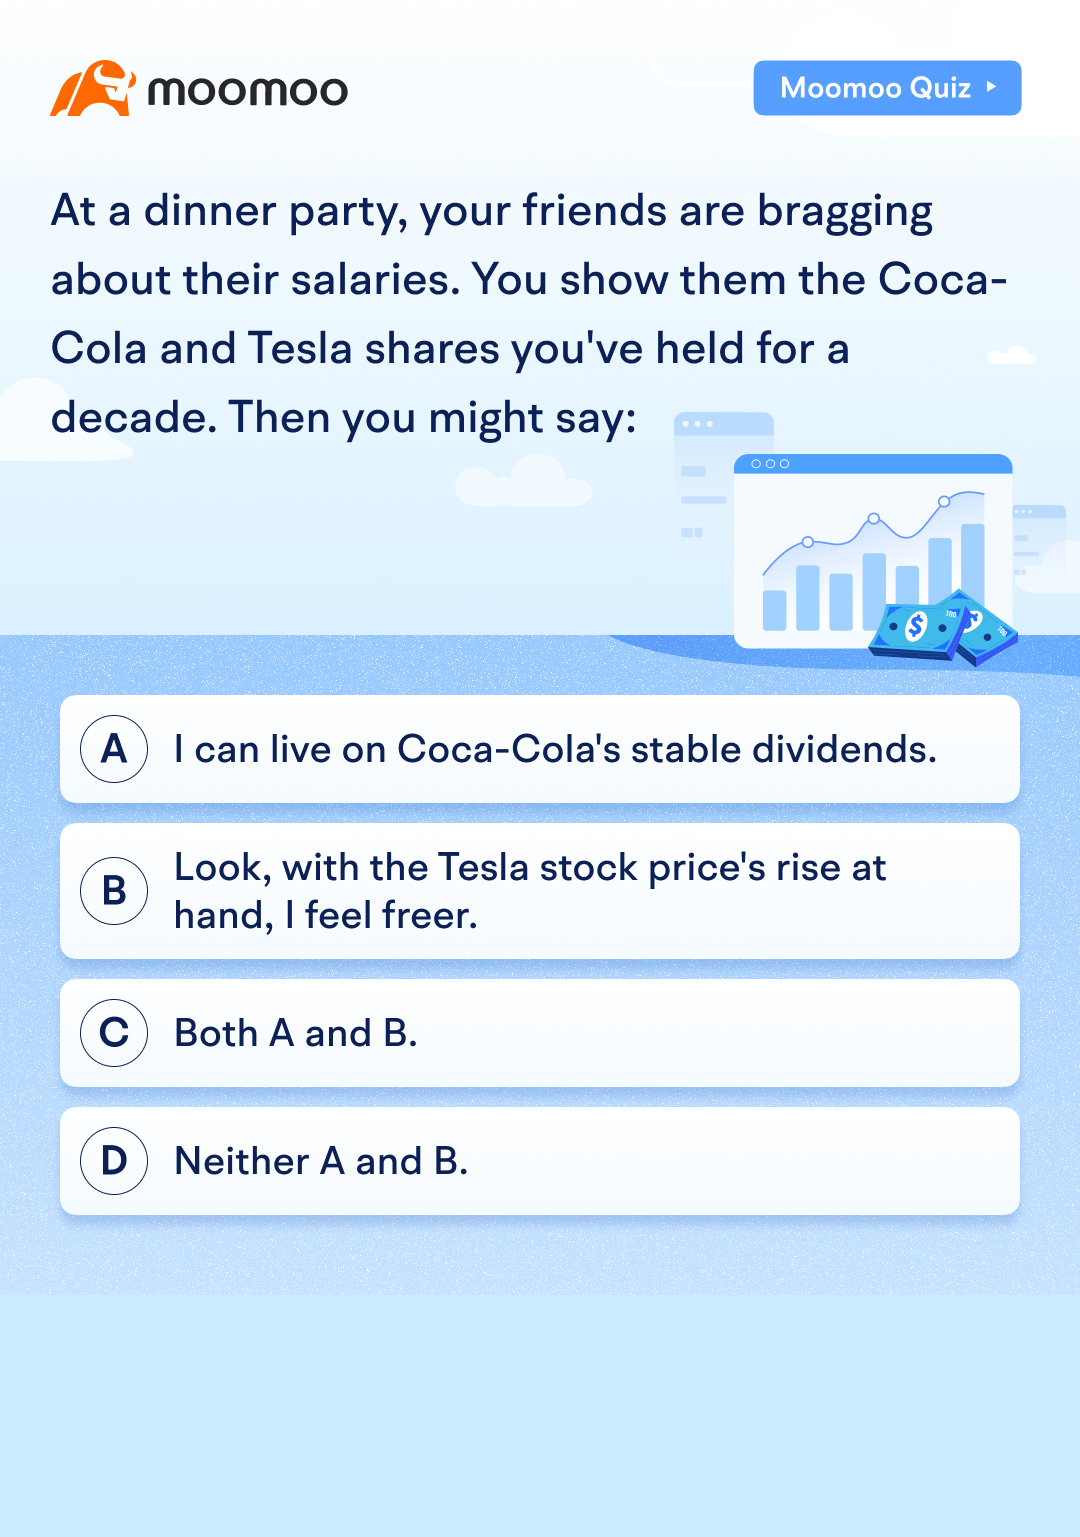 [Quiz Time] You show them the Coca-Cola and Tesla shares you've held for a decade. Then you might say: